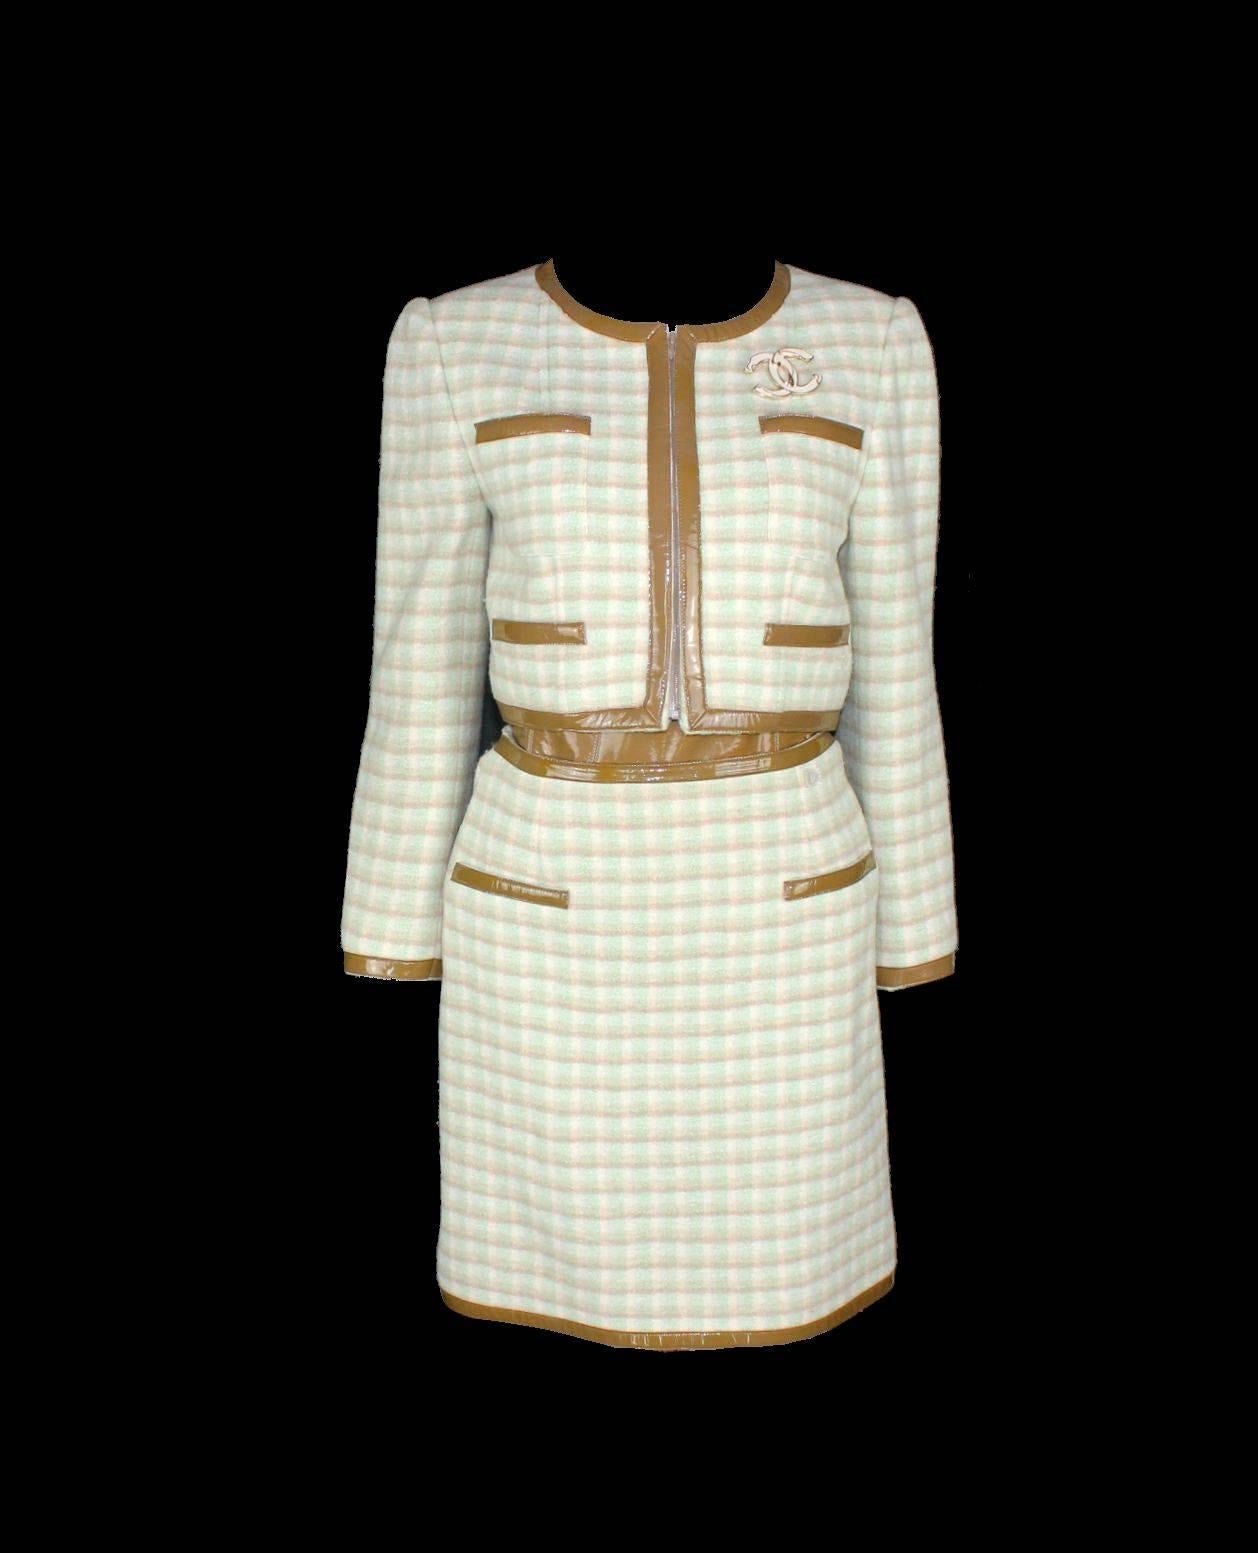 Beautiful Chanel Signature ensemble
Consisting of three pieces - Jacket, Skirt and Corset Belt
Can be worn as a complete outfit or each piece by itself
A very versatile ensemble that lasts for many years
The suit's color is in beautiful pastel